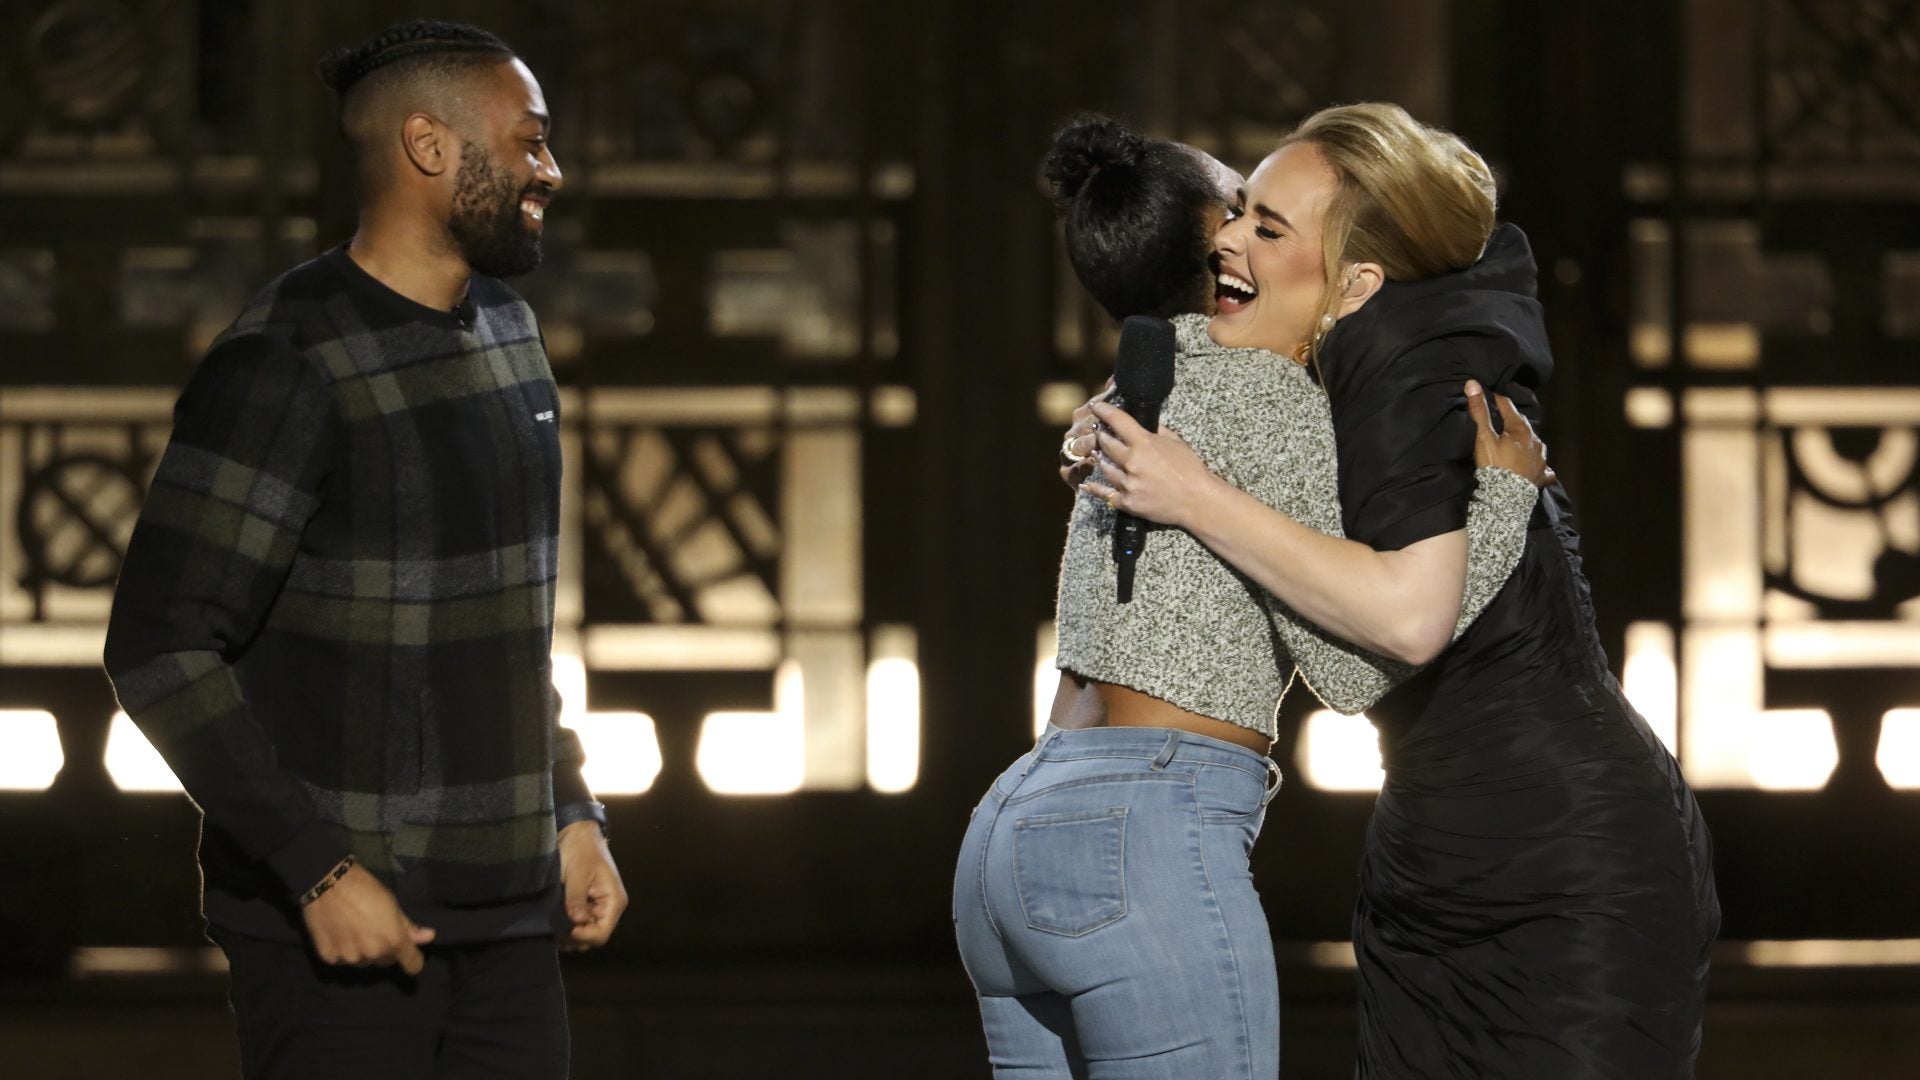 Hello To The Engaged Side! Adele Helps Black Couple Nail Surprise Engagement At Her Concert